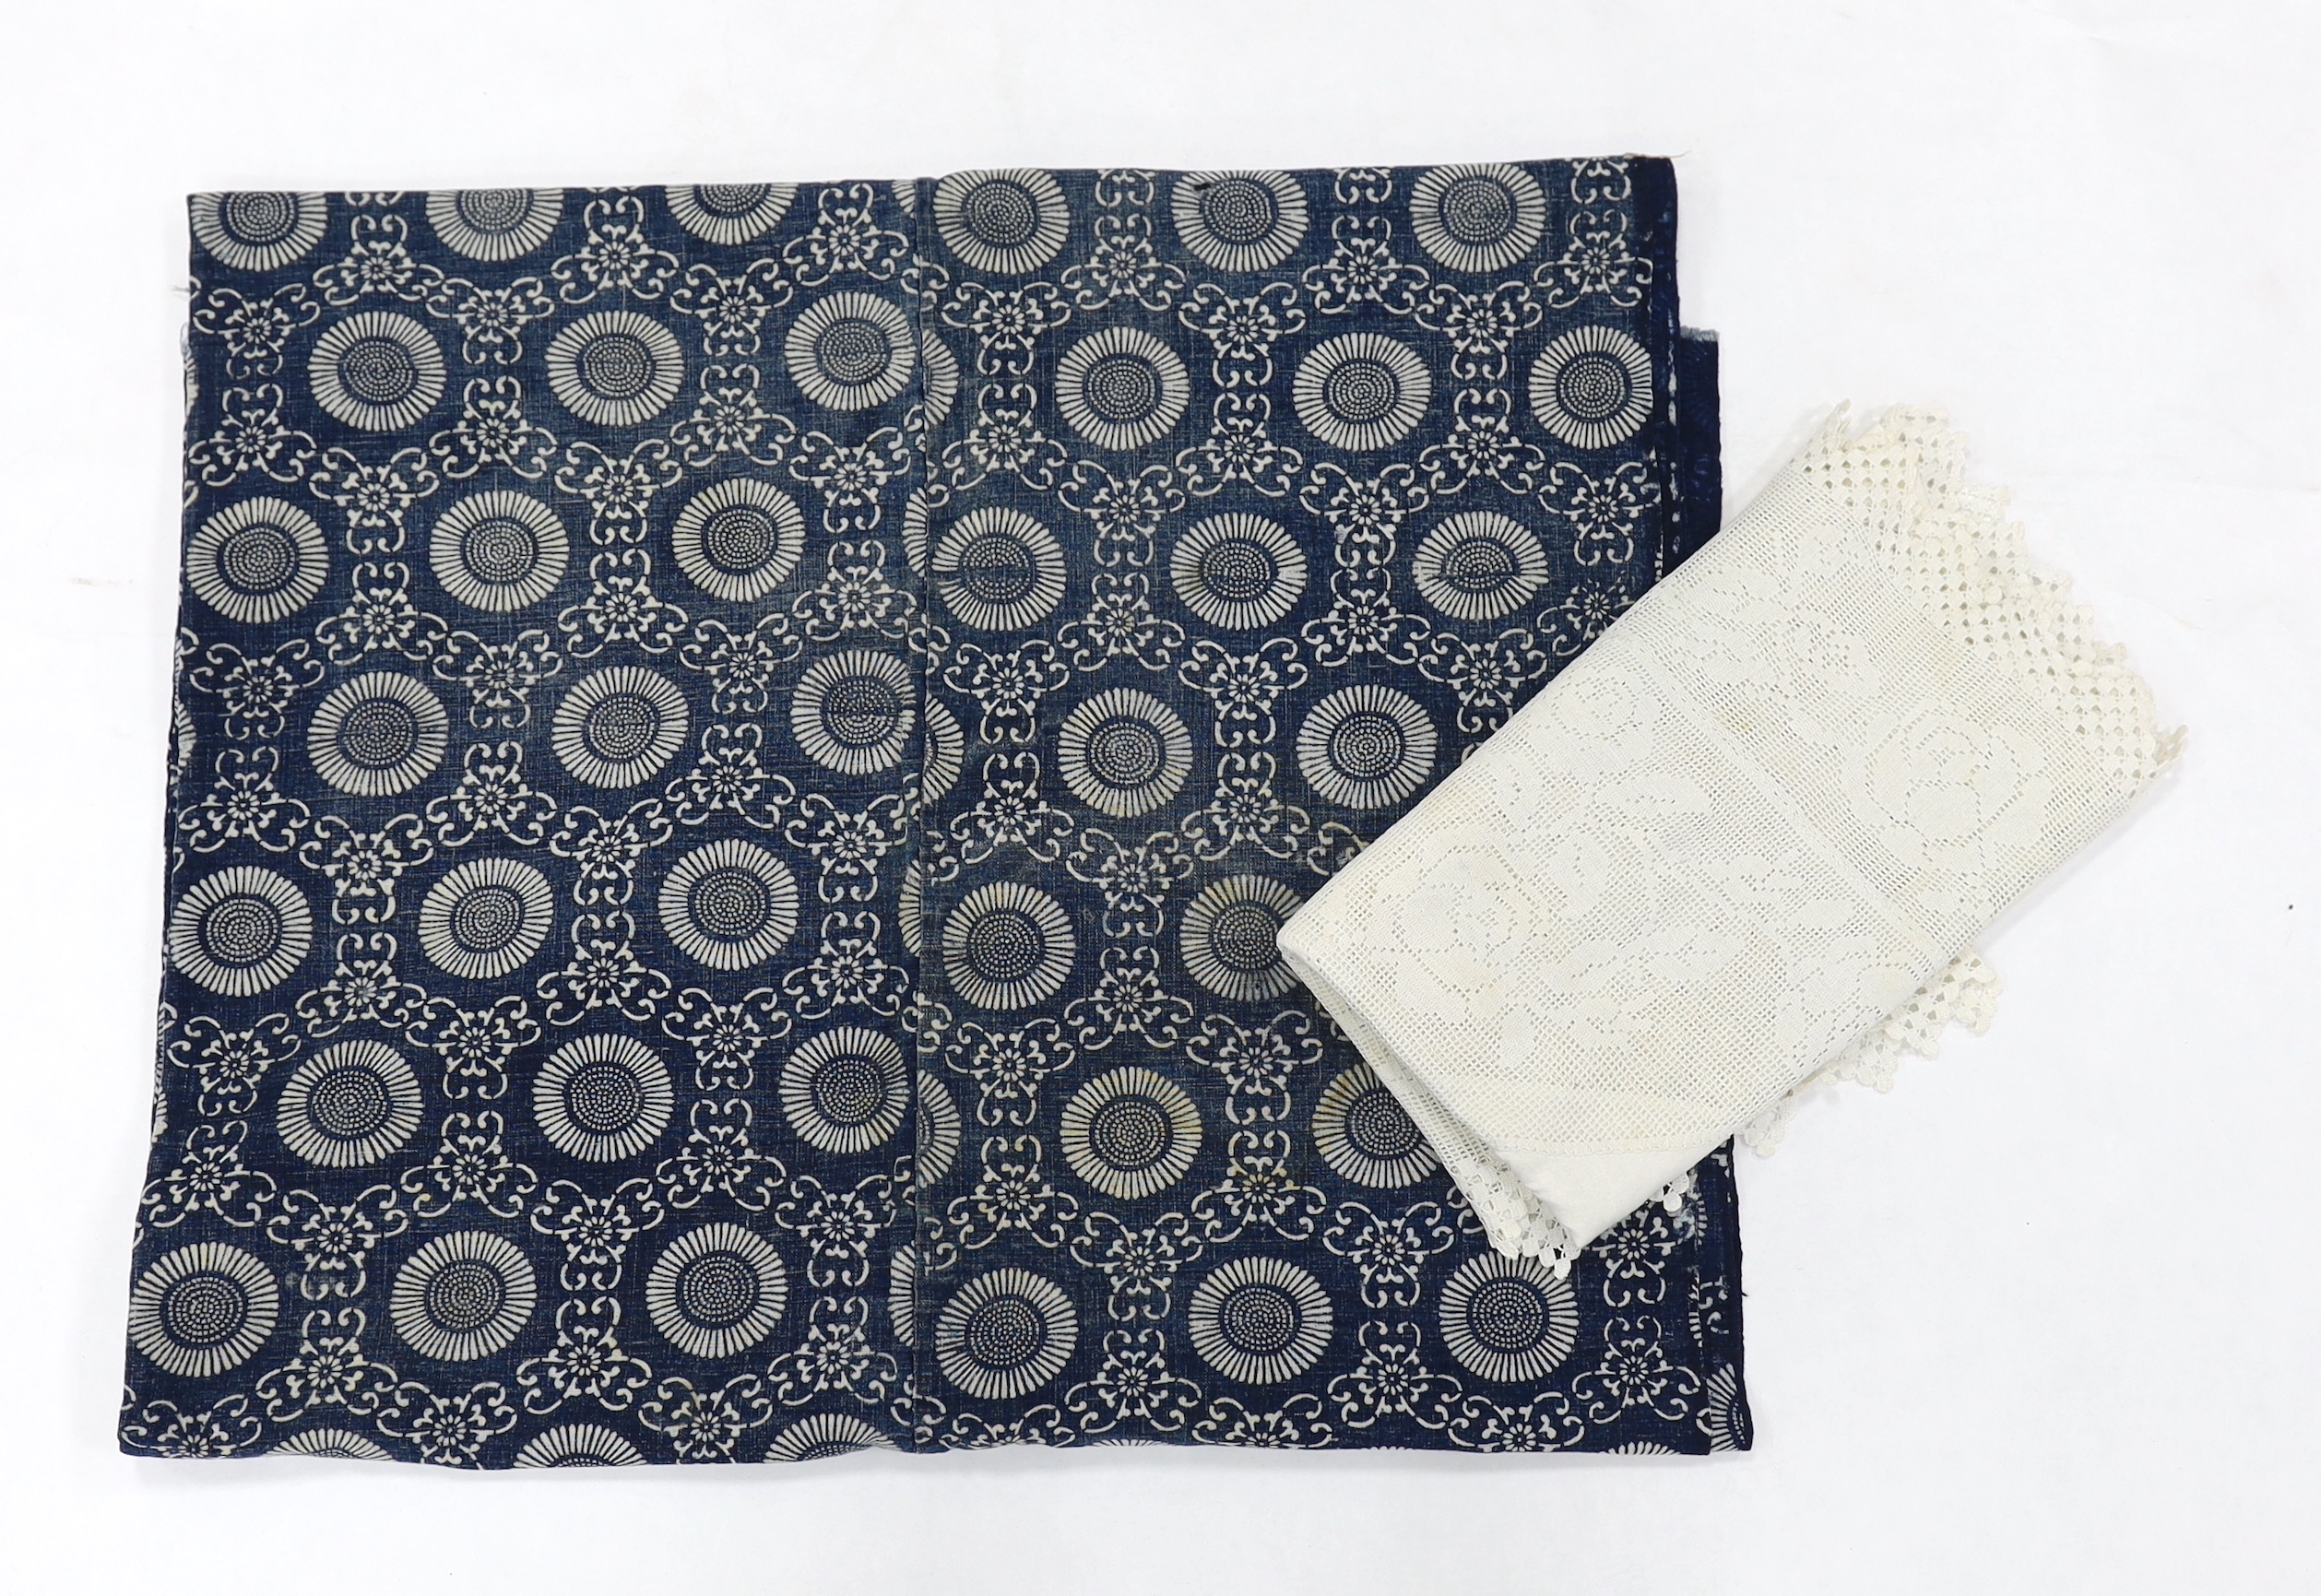 A tablecloth with a wide crocheted border and a blue and white Japanese panel decorated with mons, Japanese fabric 215cm long x 138cm wide (2)